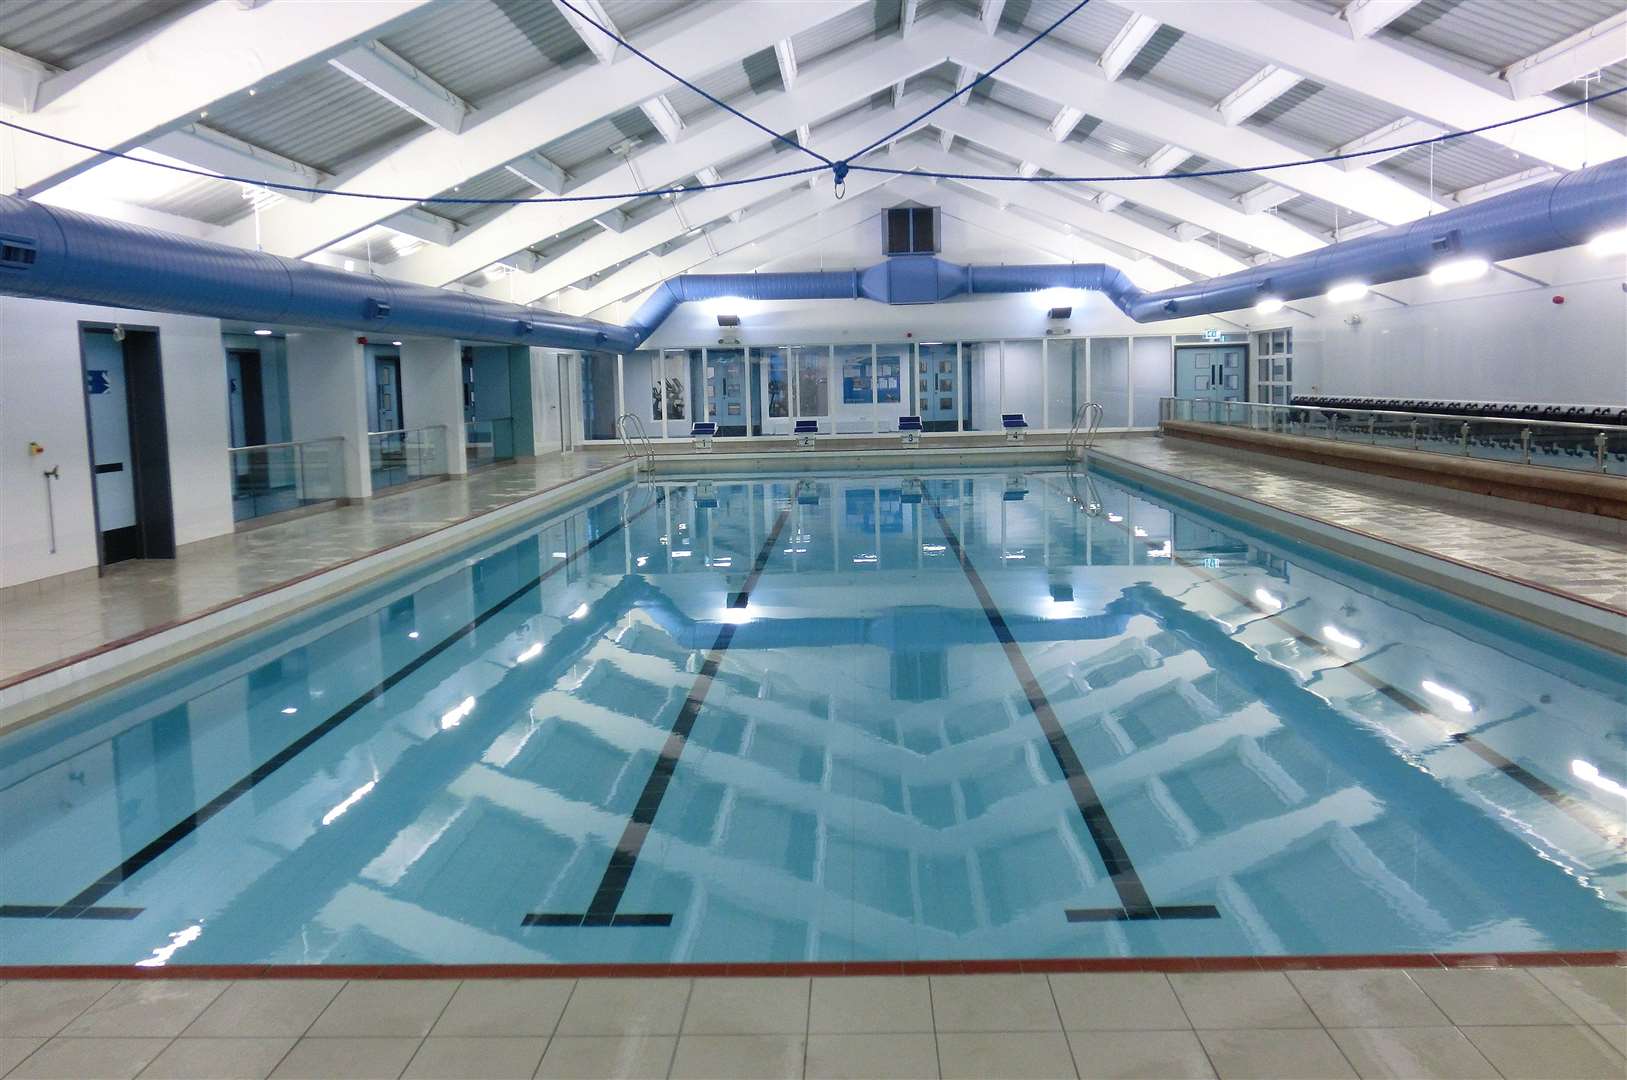 Thurso Swimming Pool is one of the venues included in the Leisure Link Partnership.